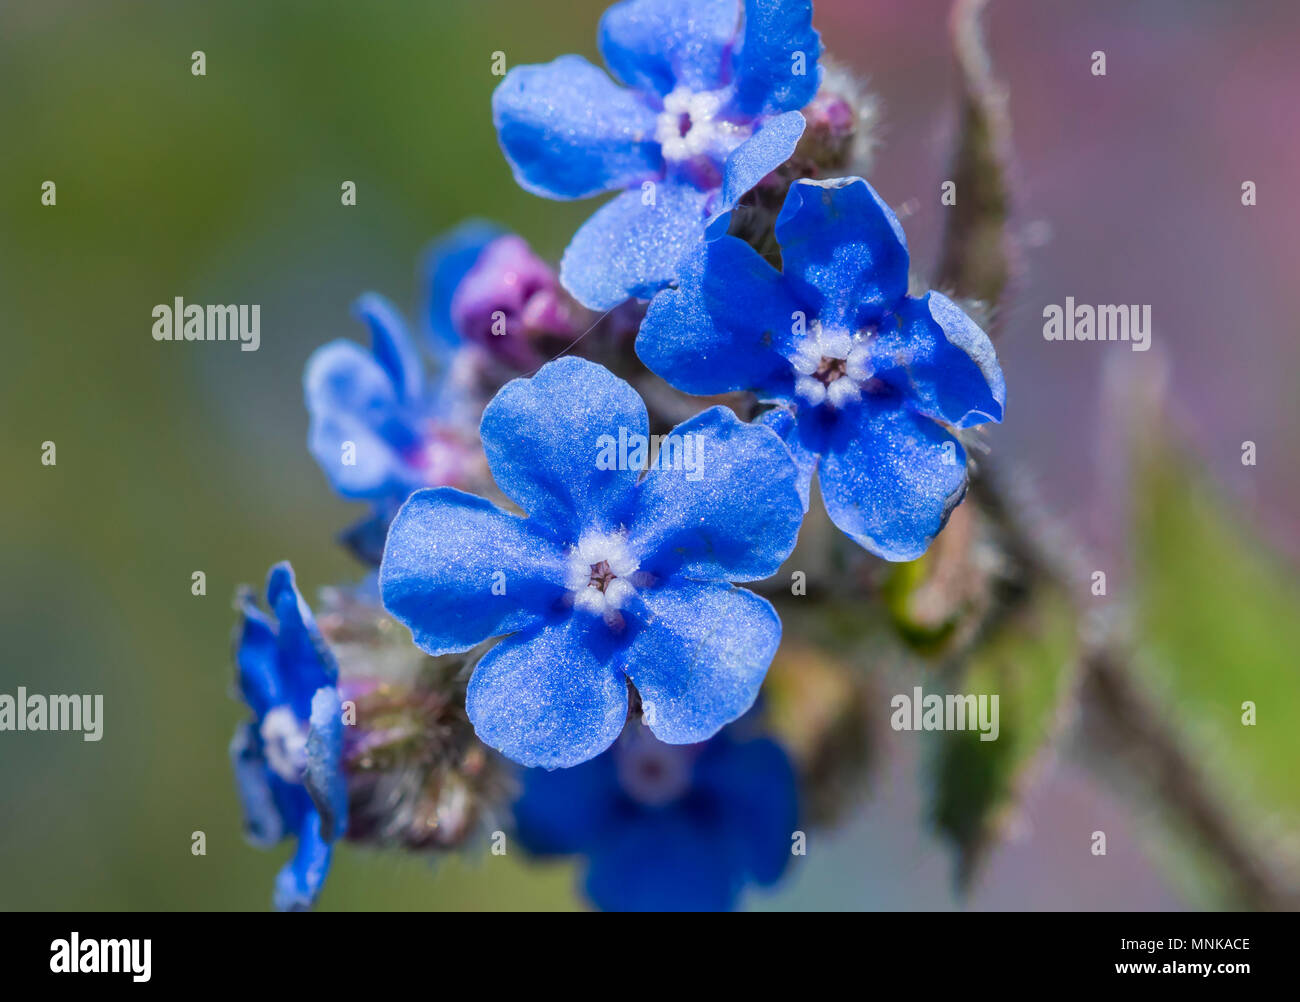 Small blue flowers from Green Alkanet plant (Pentaglottis sempervirens, AKA Evergreen bugloss). Bristly perennial in late Spring in West Sussex, UK. Stock Photo